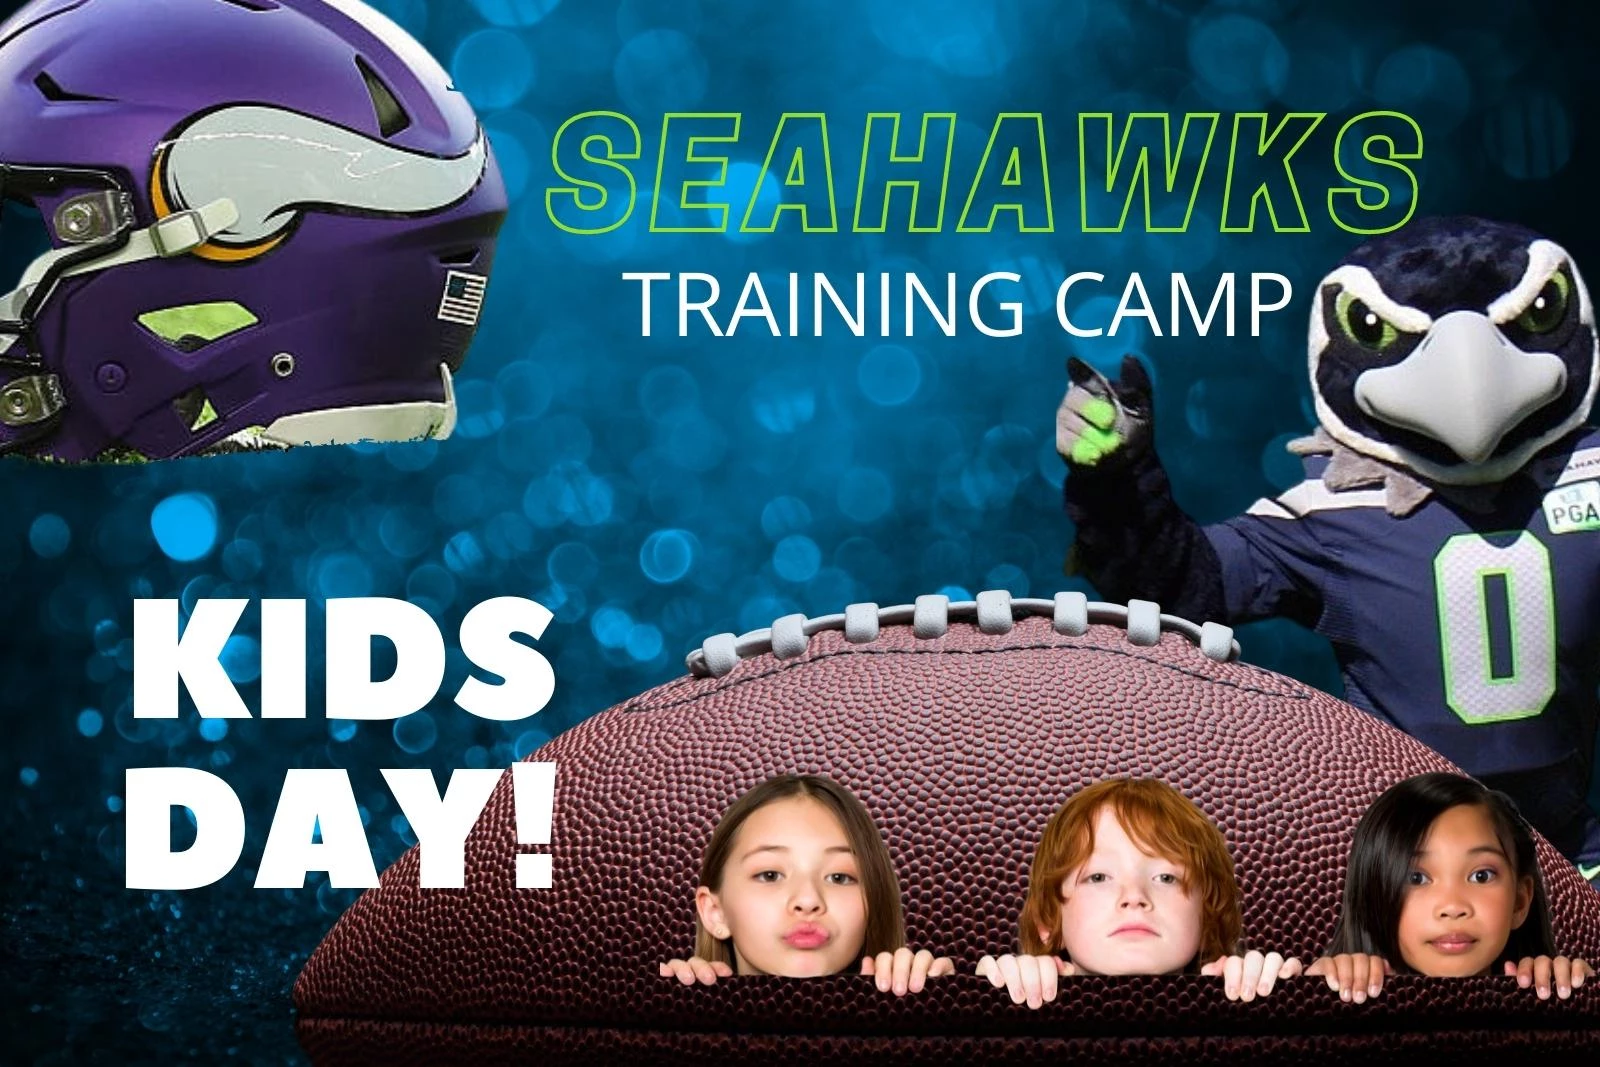 KIDS DAY Is Happening at Seattle Seahawks Training Camp! Fun!